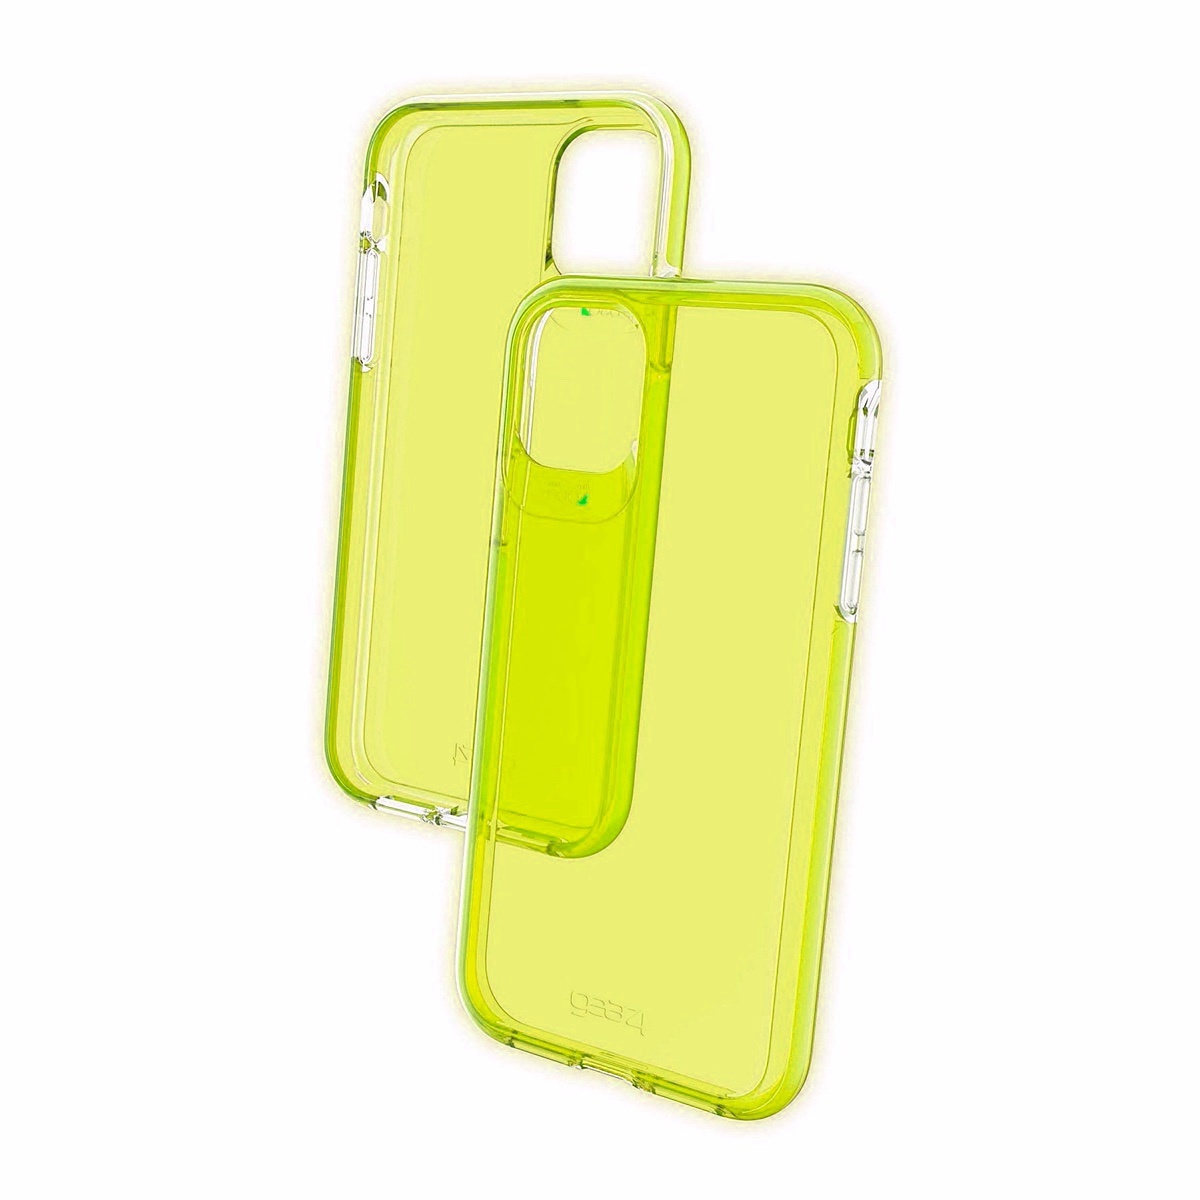 GEAR4 D3O Crystal Palace Apple iPhone 11 Pro Max (Neon Yellow)